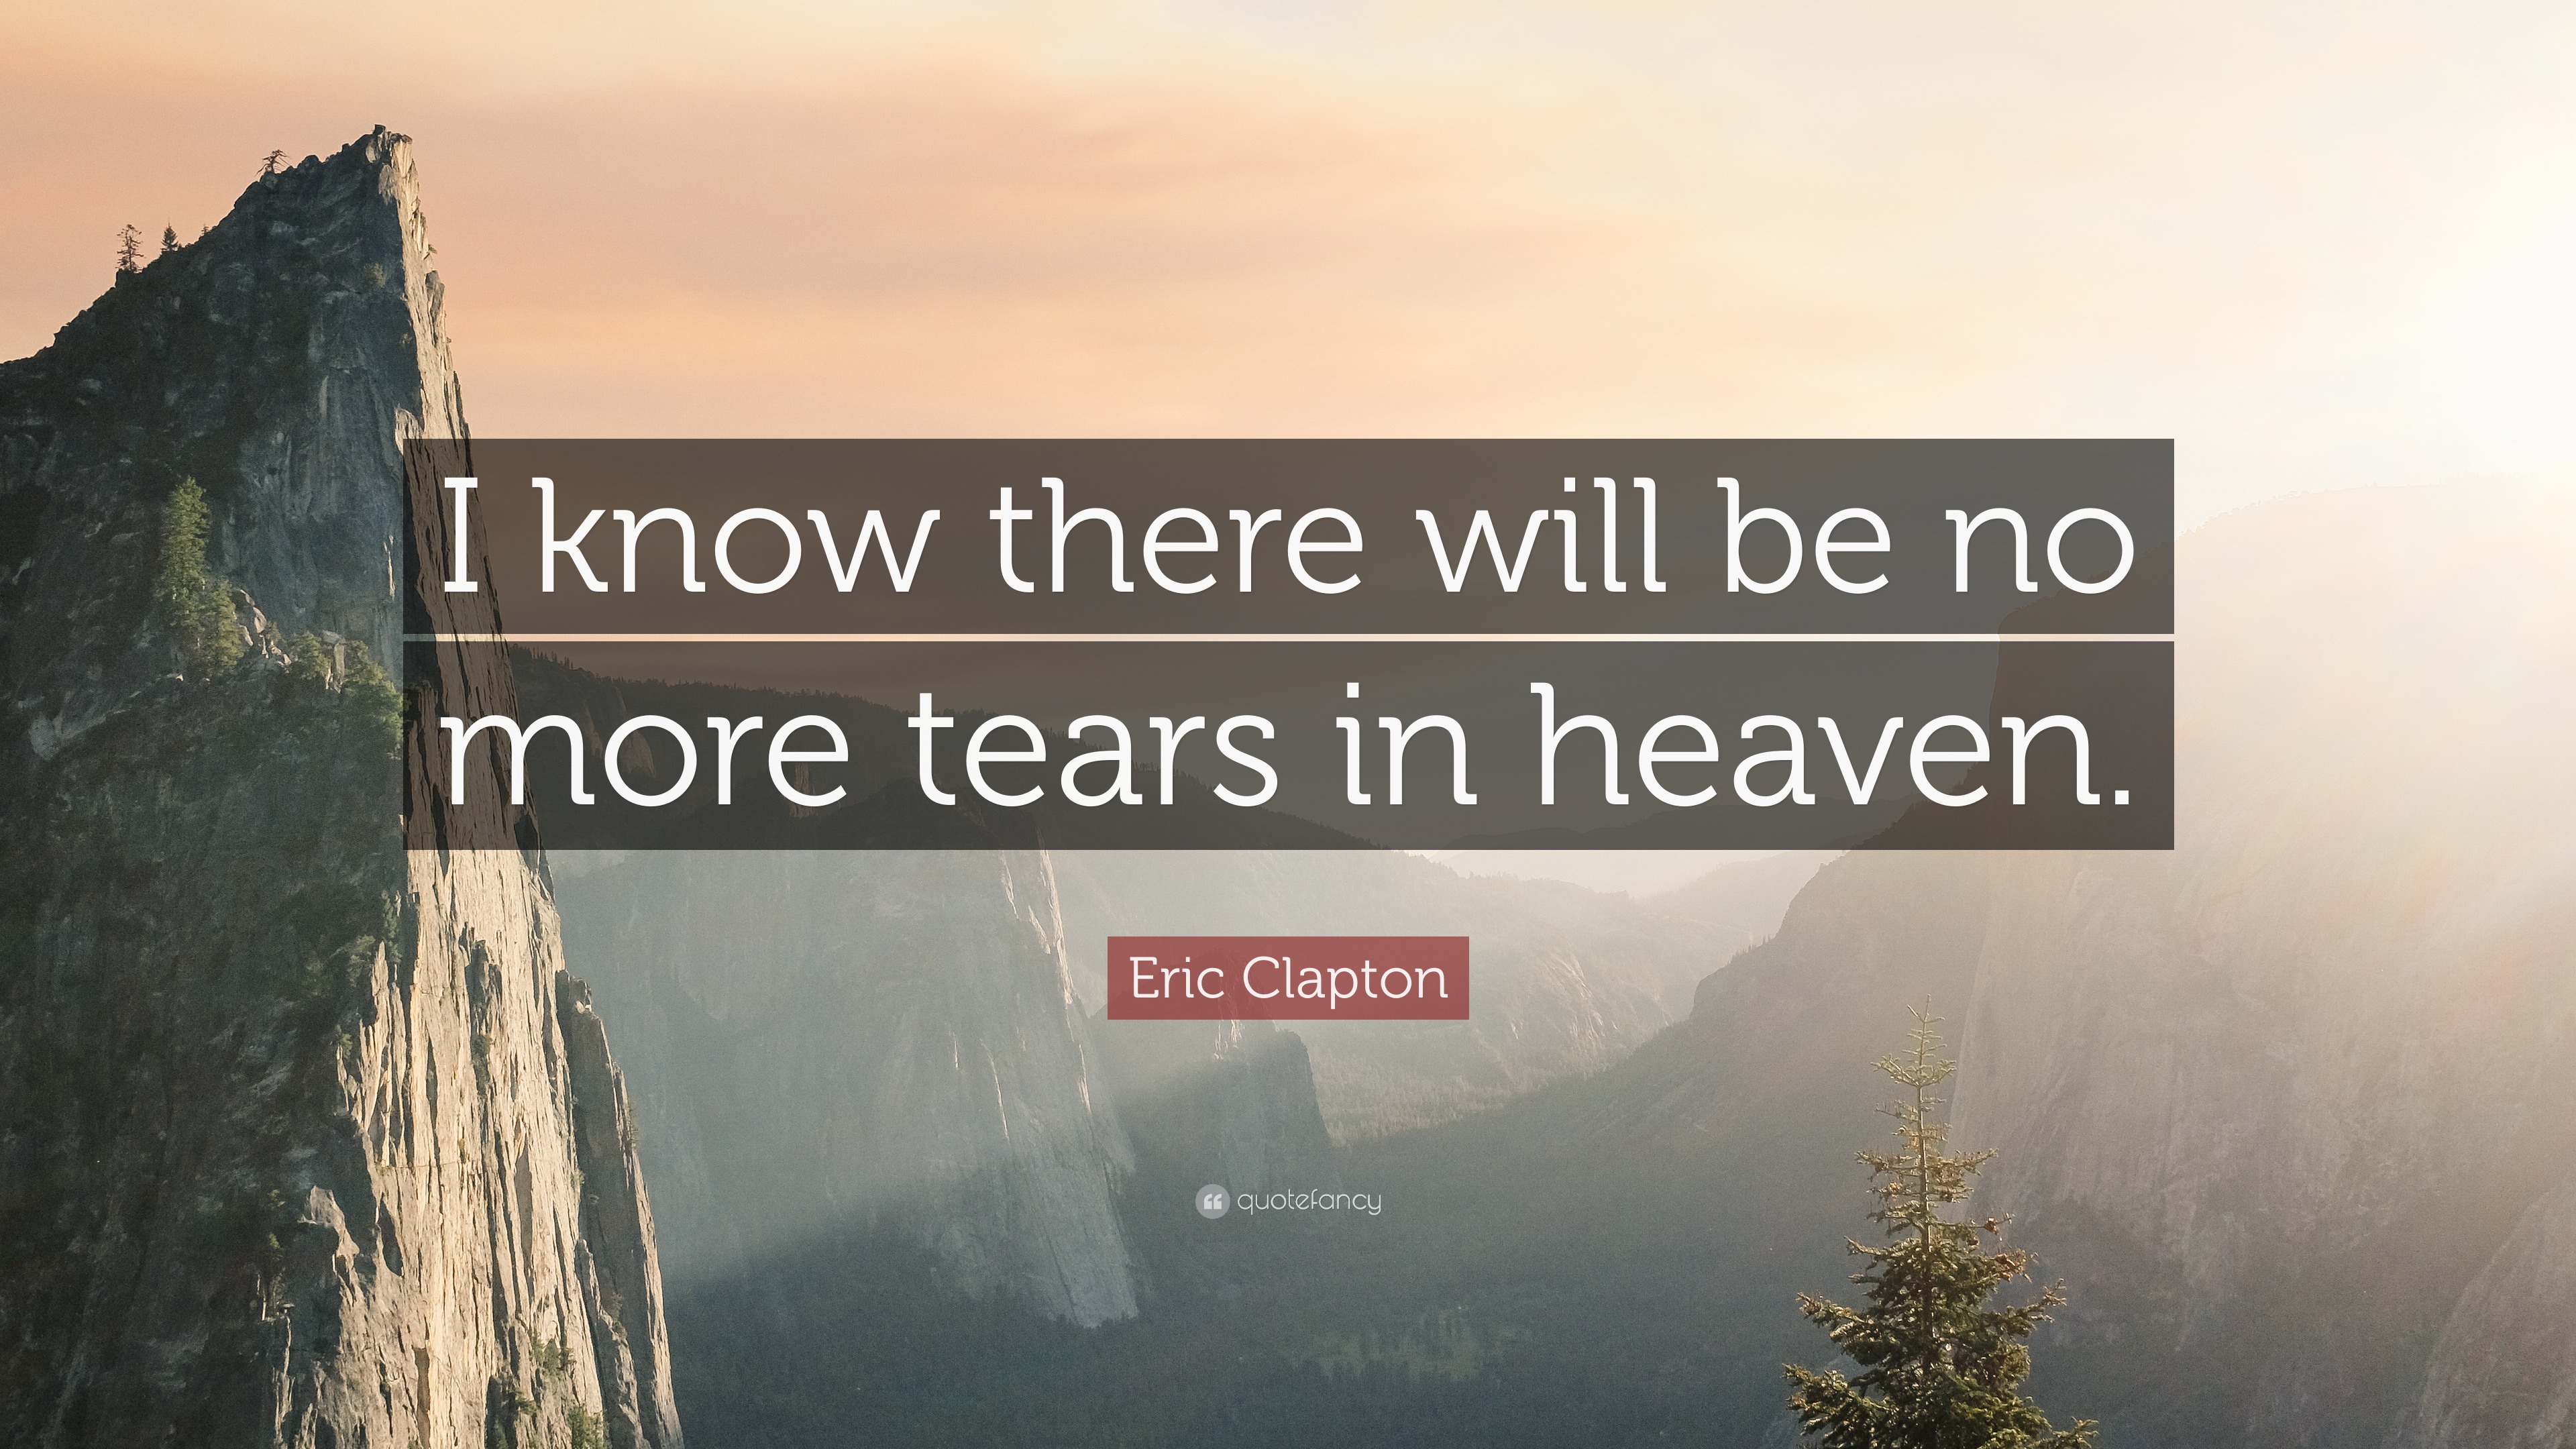 Eric Clapton Quote: "I know there will be no more tears in ...